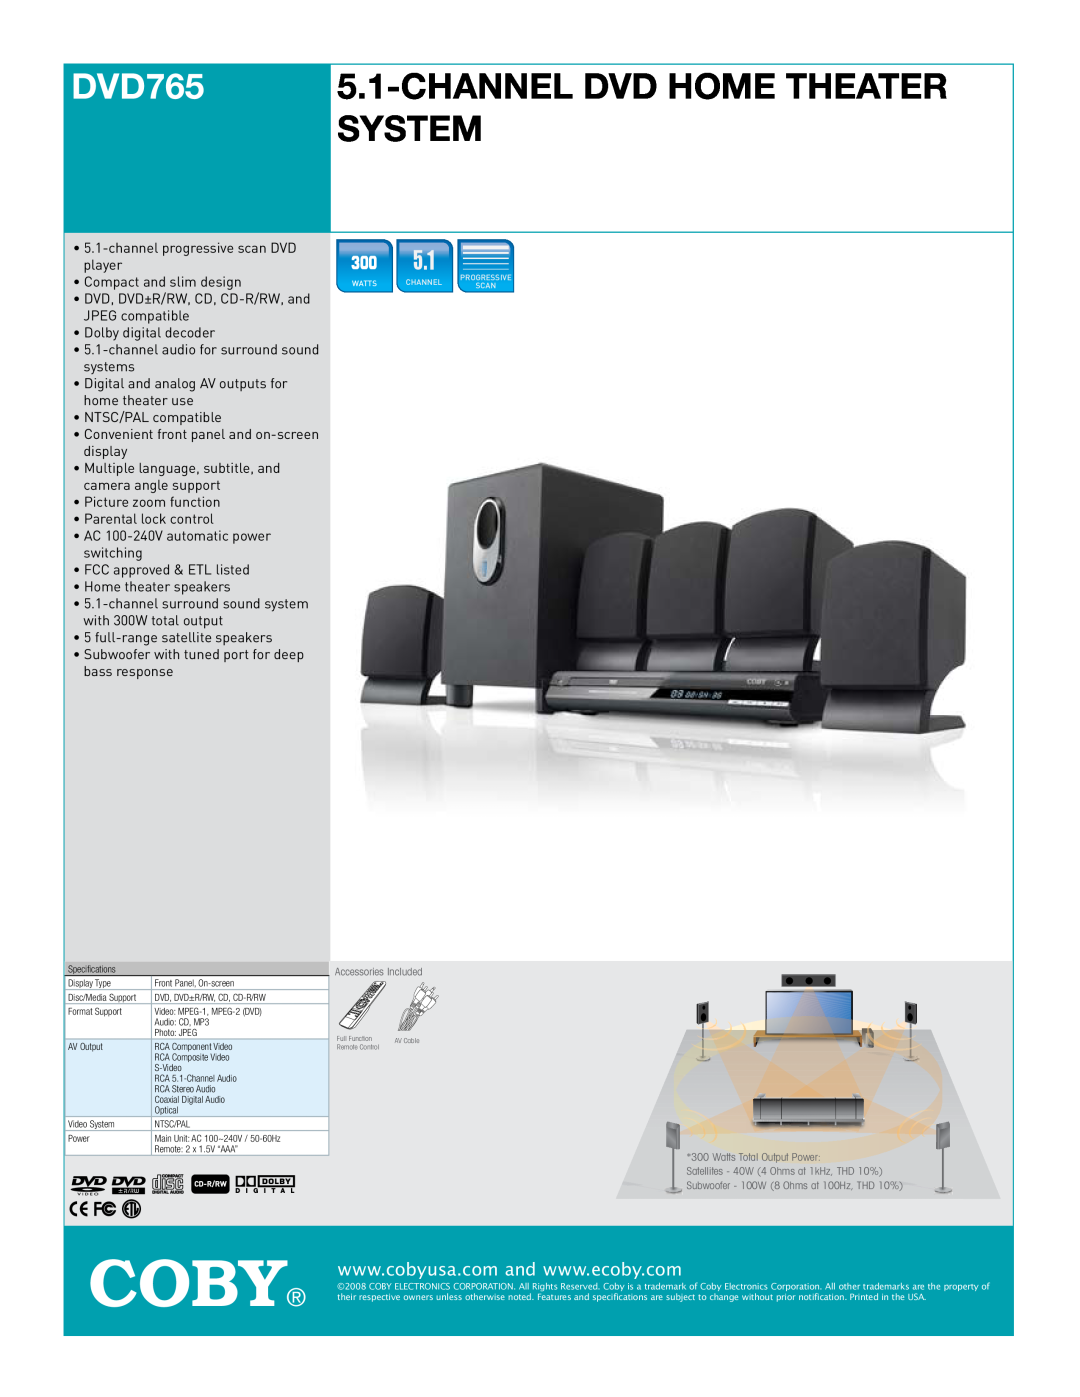 COBY electronic DVD765 specifications Coby, Channeldvd Home Theater System,   